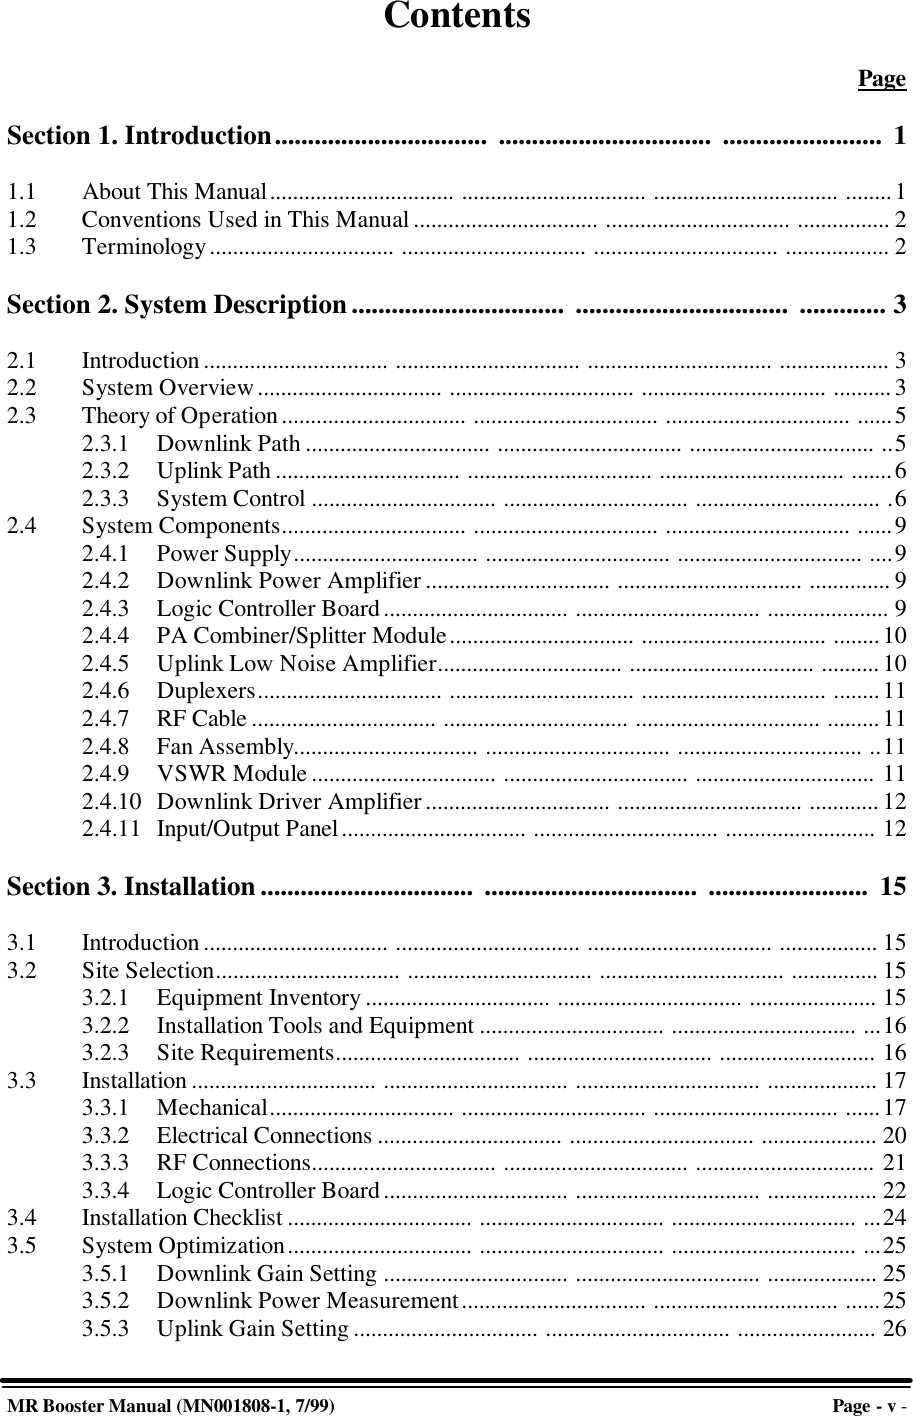 MR Booster Manual (MN001808-1, 7/99)Page - v -ContentsPageSection 1. Introduction................................ ................................ ........................ 11.1 About This Manual................................ ................................ ................................ ........11.2 Conventions Used in This Manual ................................ ................................ ................ 21.3 Terminology................................ ................................ ................................ .................. 2Section 2. System Description................................ ................................ ............. 32.1 Introduction ................................ ................................ ................................ ................... 32.2 System Overview................................ ................................ ................................ .......... 32.3 Theory of Operation ................................ ................................ ................................ ......52.3.1 Downlink Path ................................ ................................ ................................ ..52.3.2 Uplink Path ................................ ................................ ................................ .......62.3.3 System Control ................................ ................................ ................................ .62.4 System Components................................ ................................ ................................ ......92.4.1 Power Supply................................ ................................ ................................ ....92.4.2 Downlink Power Amplifier ................................ ................................ .............. 92.4.3 Logic Controller Board................................ ................................ ..................... 92.4.4 PA Combiner/Splitter Module................................ ................................ ........102.4.5 Uplink Low Noise Amplifier................................ ................................ ..........102.4.6 Duplexers................................ ................................ ................................ ........112.4.7 RF Cable ................................ ................................ ................................ ......... 112.4.8 Fan Assembly................................ ................................ ................................ ..112.4.9 VSWR Module ................................ ................................ ............................... 112.4.10 Downlink Driver Amplifier................................ ................................ ............ 122.4.11 Input/Output Panel................................ ................................ .......................... 12Section 3. Installation ................................ ................................ ........................ 153.1 Introduction ................................ ................................ ................................ ................. 153.2 Site Selection................................ ................................ ................................ ............... 153.2.1 Equipment Inventory ................................ ................................ ...................... 153.2.2 Installation Tools and Equipment ................................ ................................ ...163.2.3 Site Requirements................................ ................................ ........................... 163.3 Installation ................................ ................................ ................................ ................... 173.3.1 Mechanical................................ ................................ ................................ ......173.3.2 Electrical Connections ................................ ................................ .................... 203.3.3 RF Connections................................ ................................ ............................... 213.3.4 Logic Controller Board................................ ................................ ................... 223.4 Installation Checklist ................................ ................................ ................................ ...243.5 System Optimization................................ ................................ ................................ ...253.5.1 Downlink Gain Setting ................................ ................................ ................... 253.5.2 Downlink Power Measurement................................ ................................ ......253.5.3 Uplink Gain Setting ................................ ................................ ........................ 26